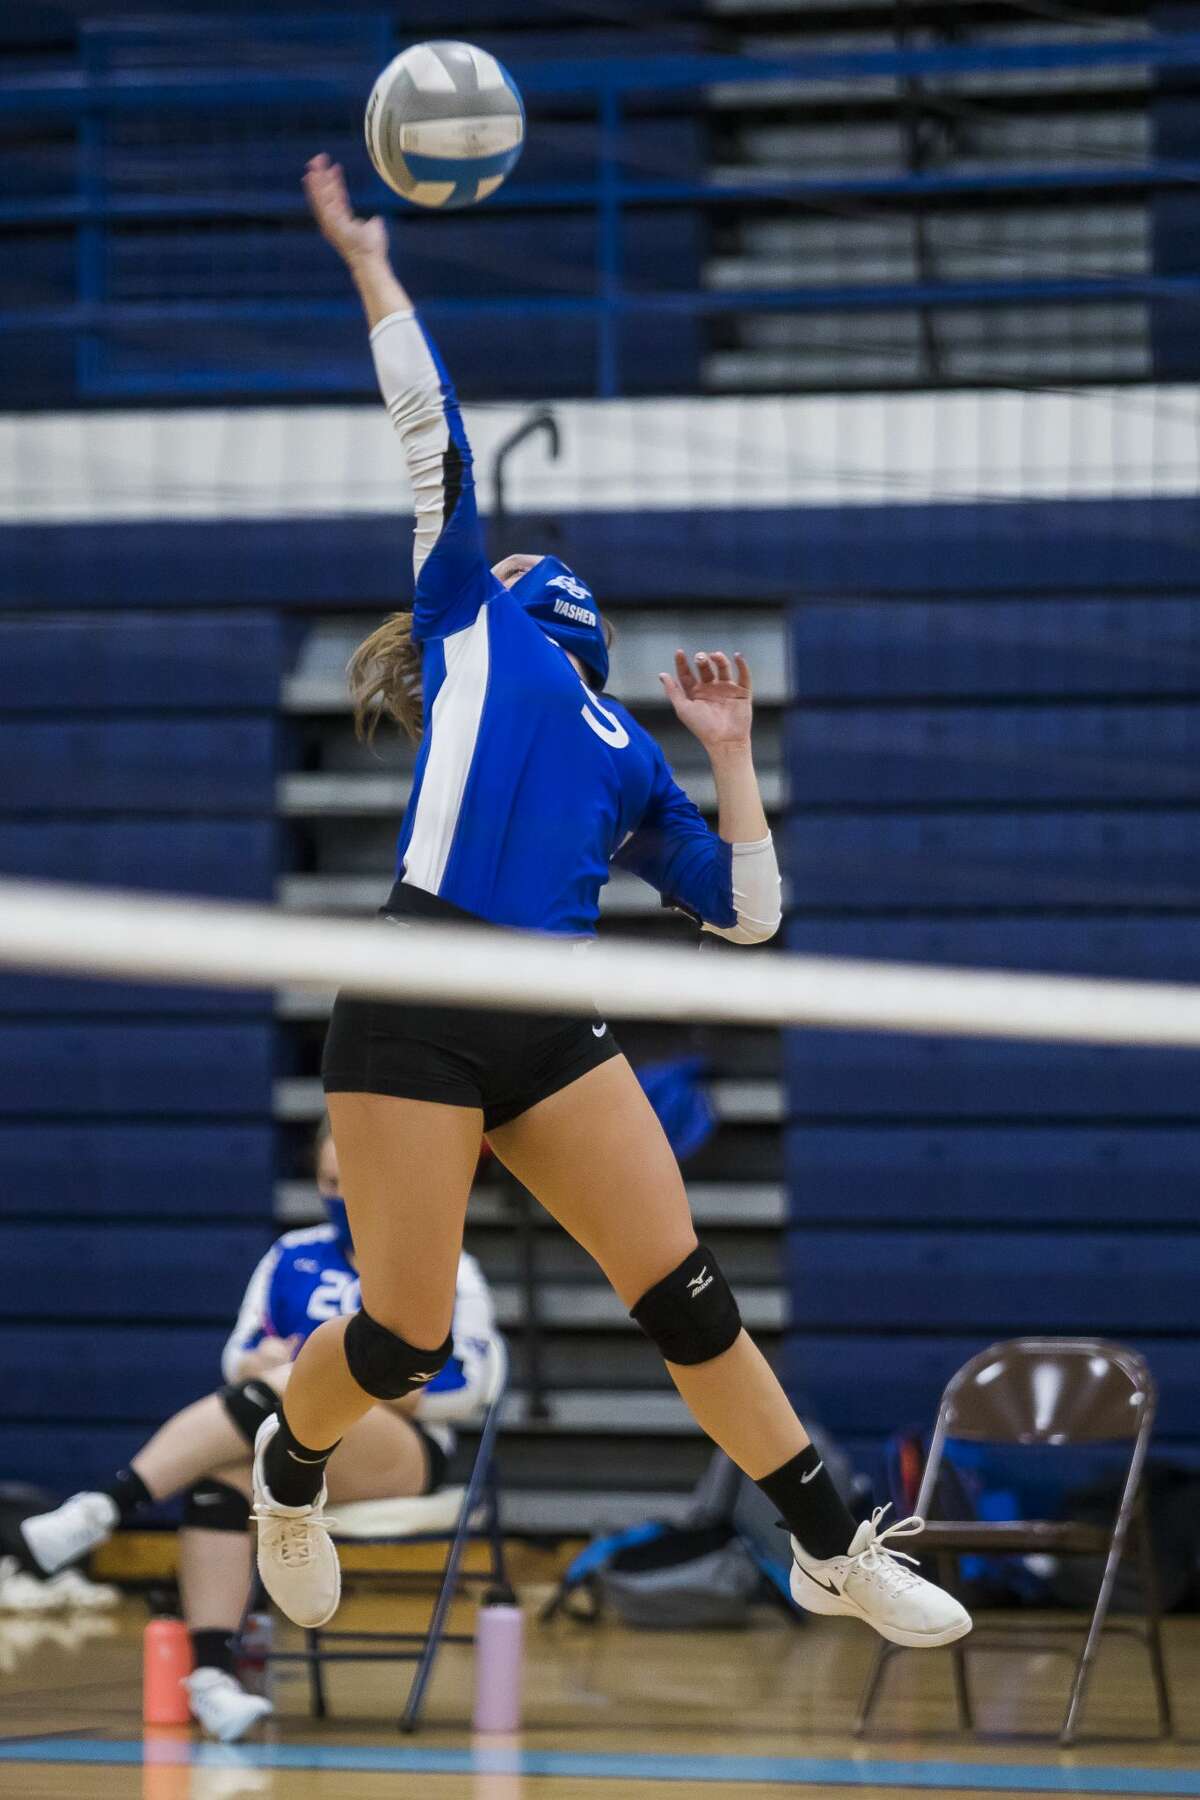 Gladwin's Taylor Vasher spikes the ball in a match against Meridian during a quad meet Wednesday, Oct. 28, 2020 at Meridian Early College High School. (Katy Kildee/kkildee@mdn.net)